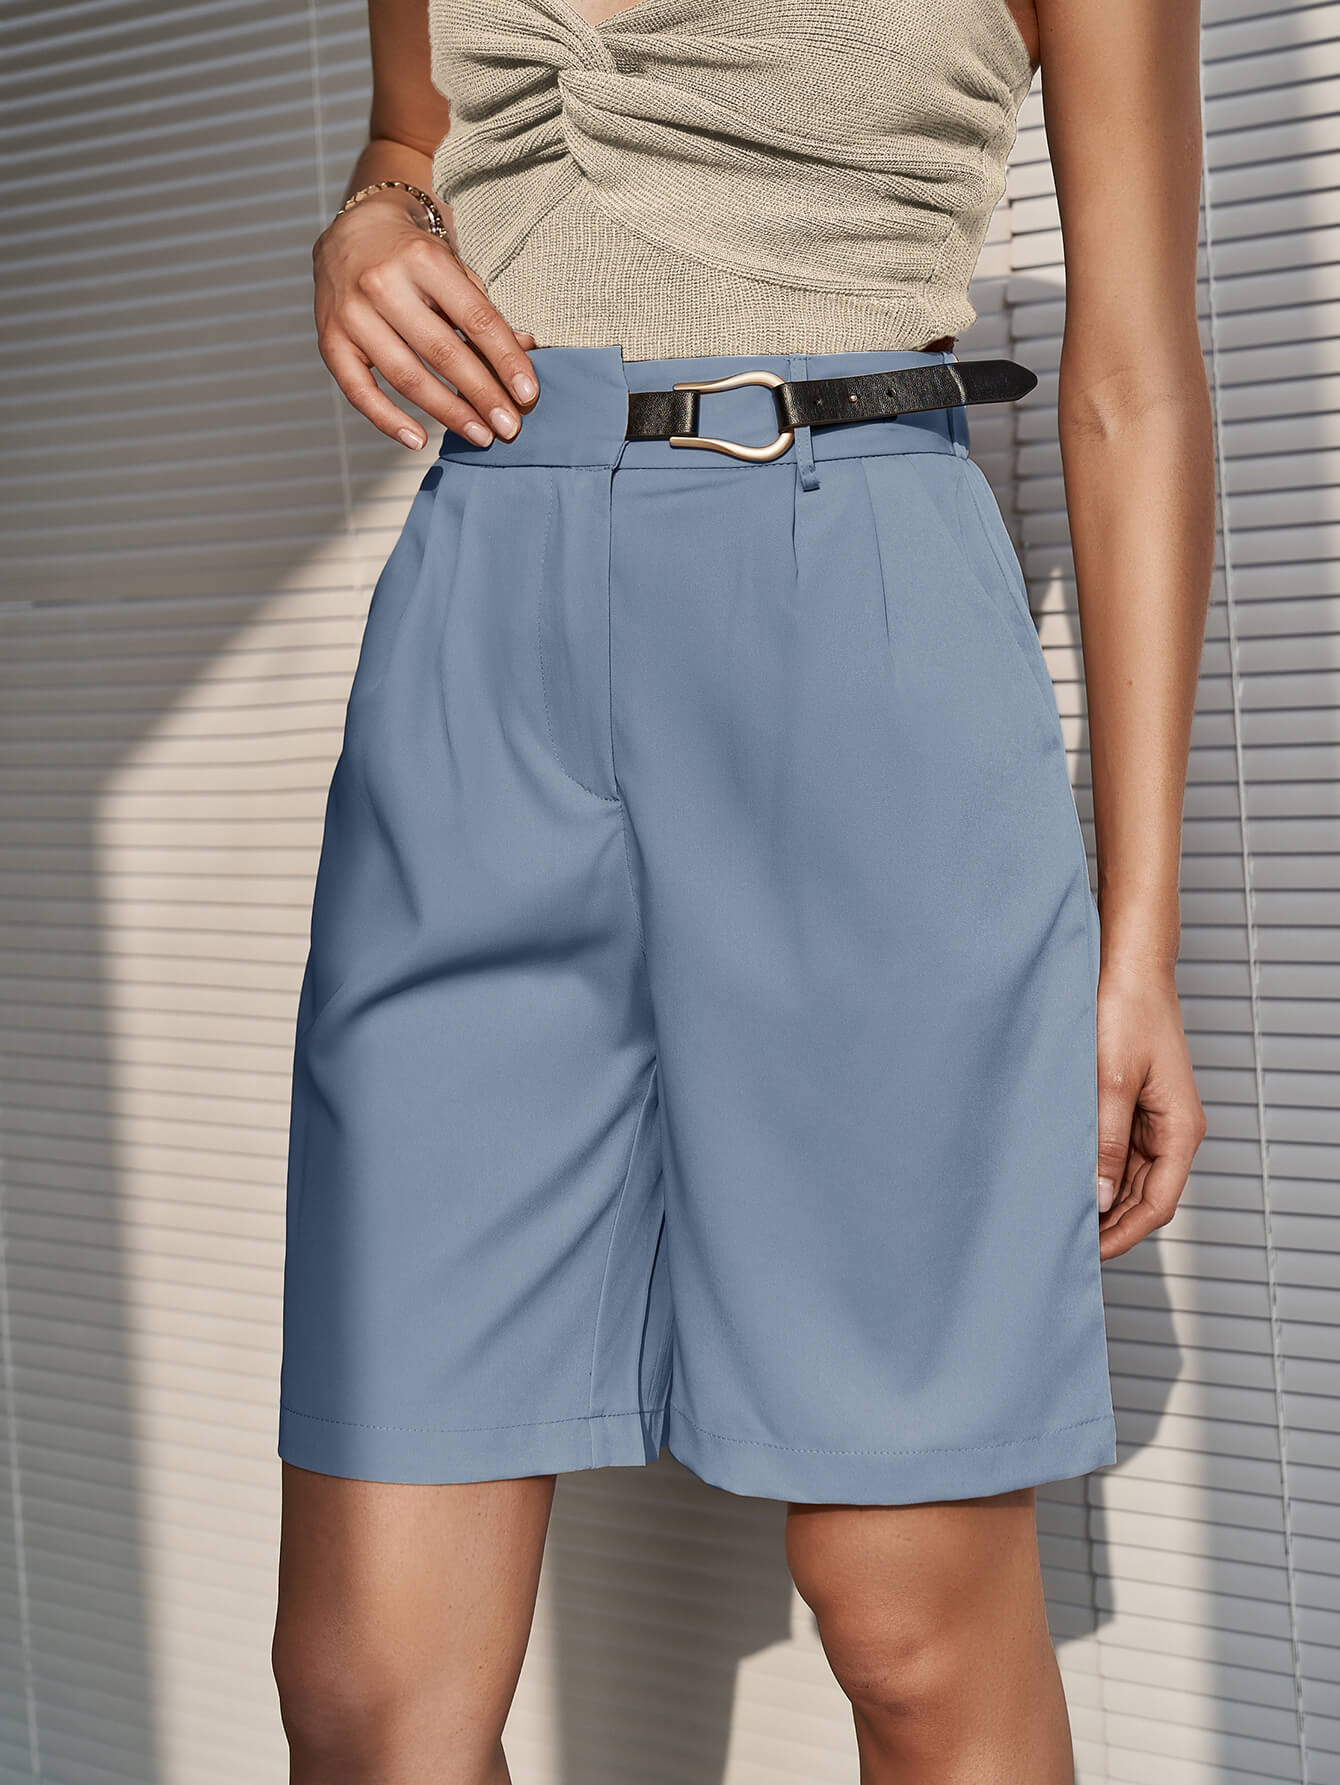 Belted Detail Bermuda Shorts with Pockets